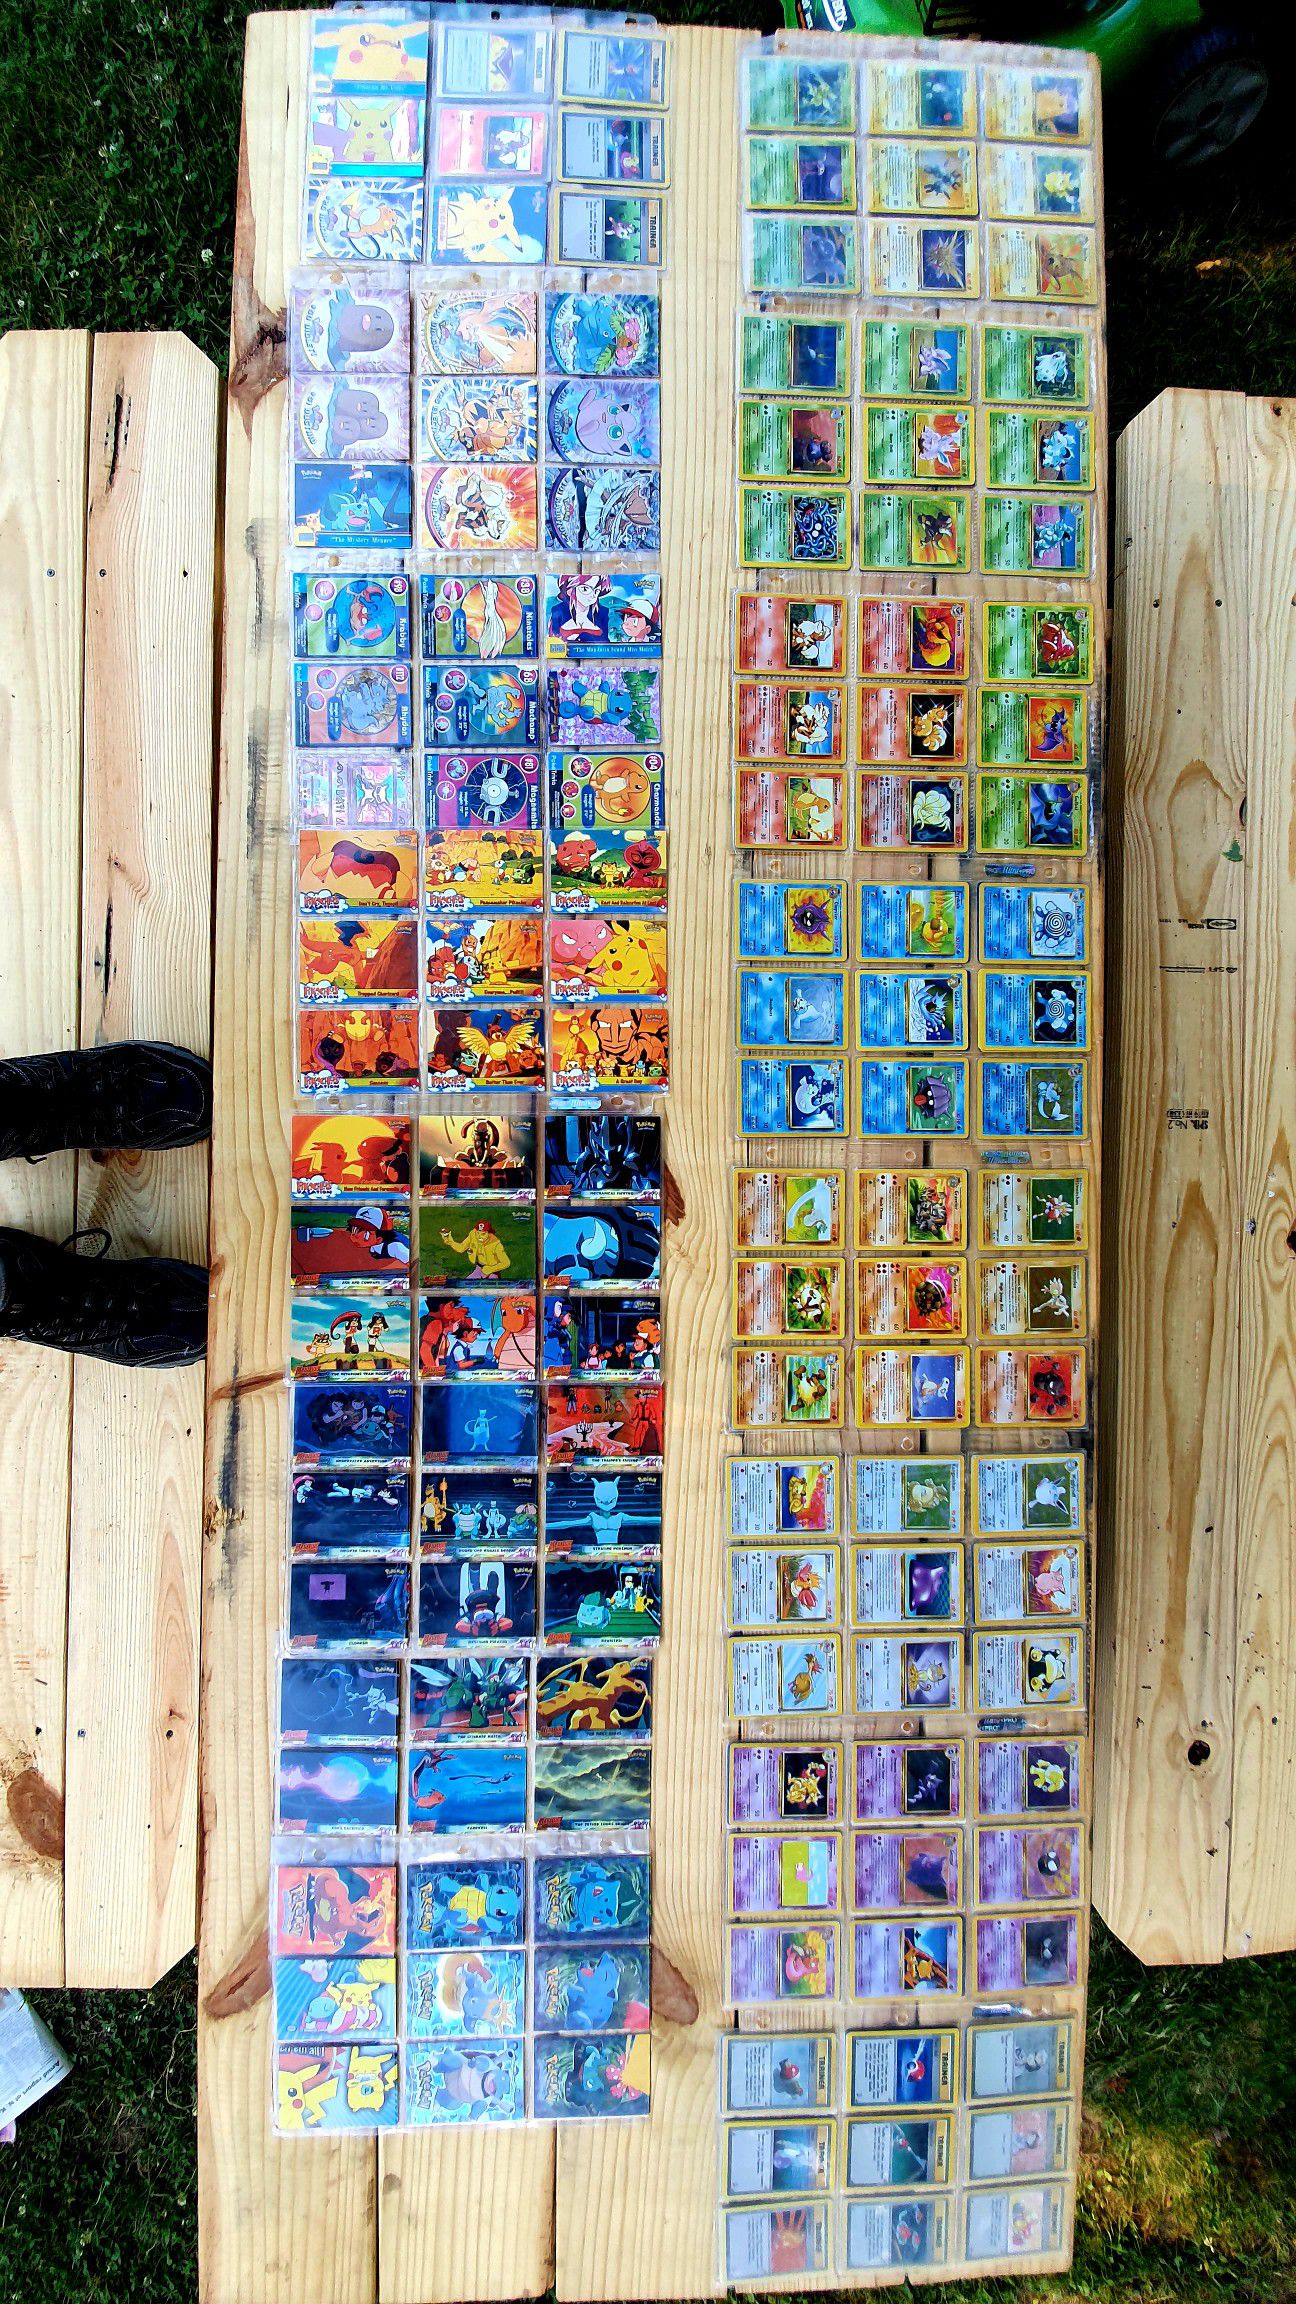 My Collection of Pokemon Trading Cards.--Buying Hole set only. No Buying singles.